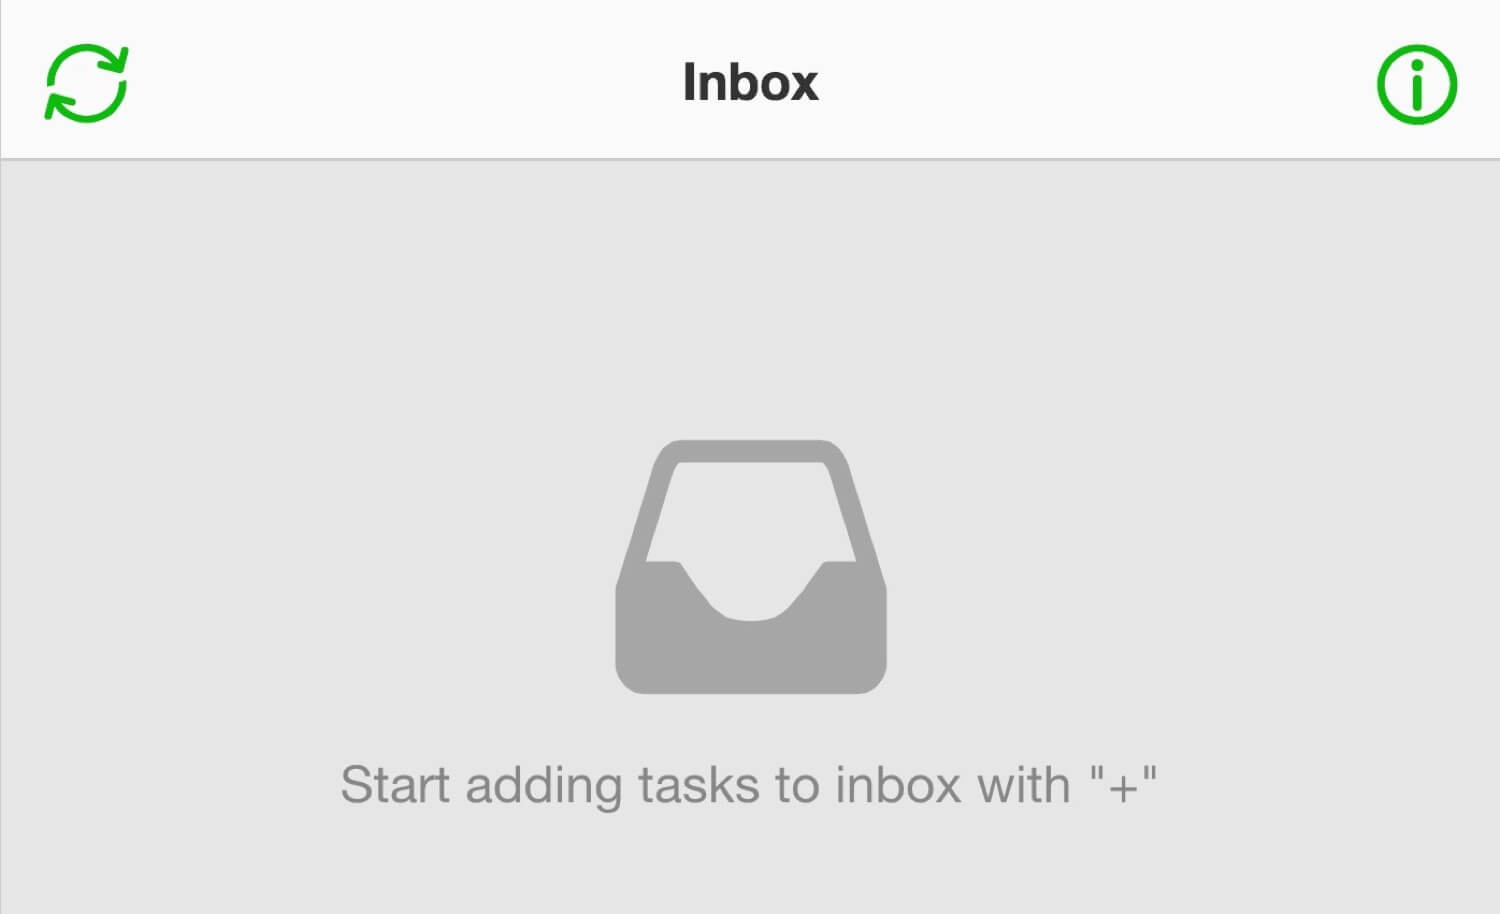 A Productivity System starts with Inbox